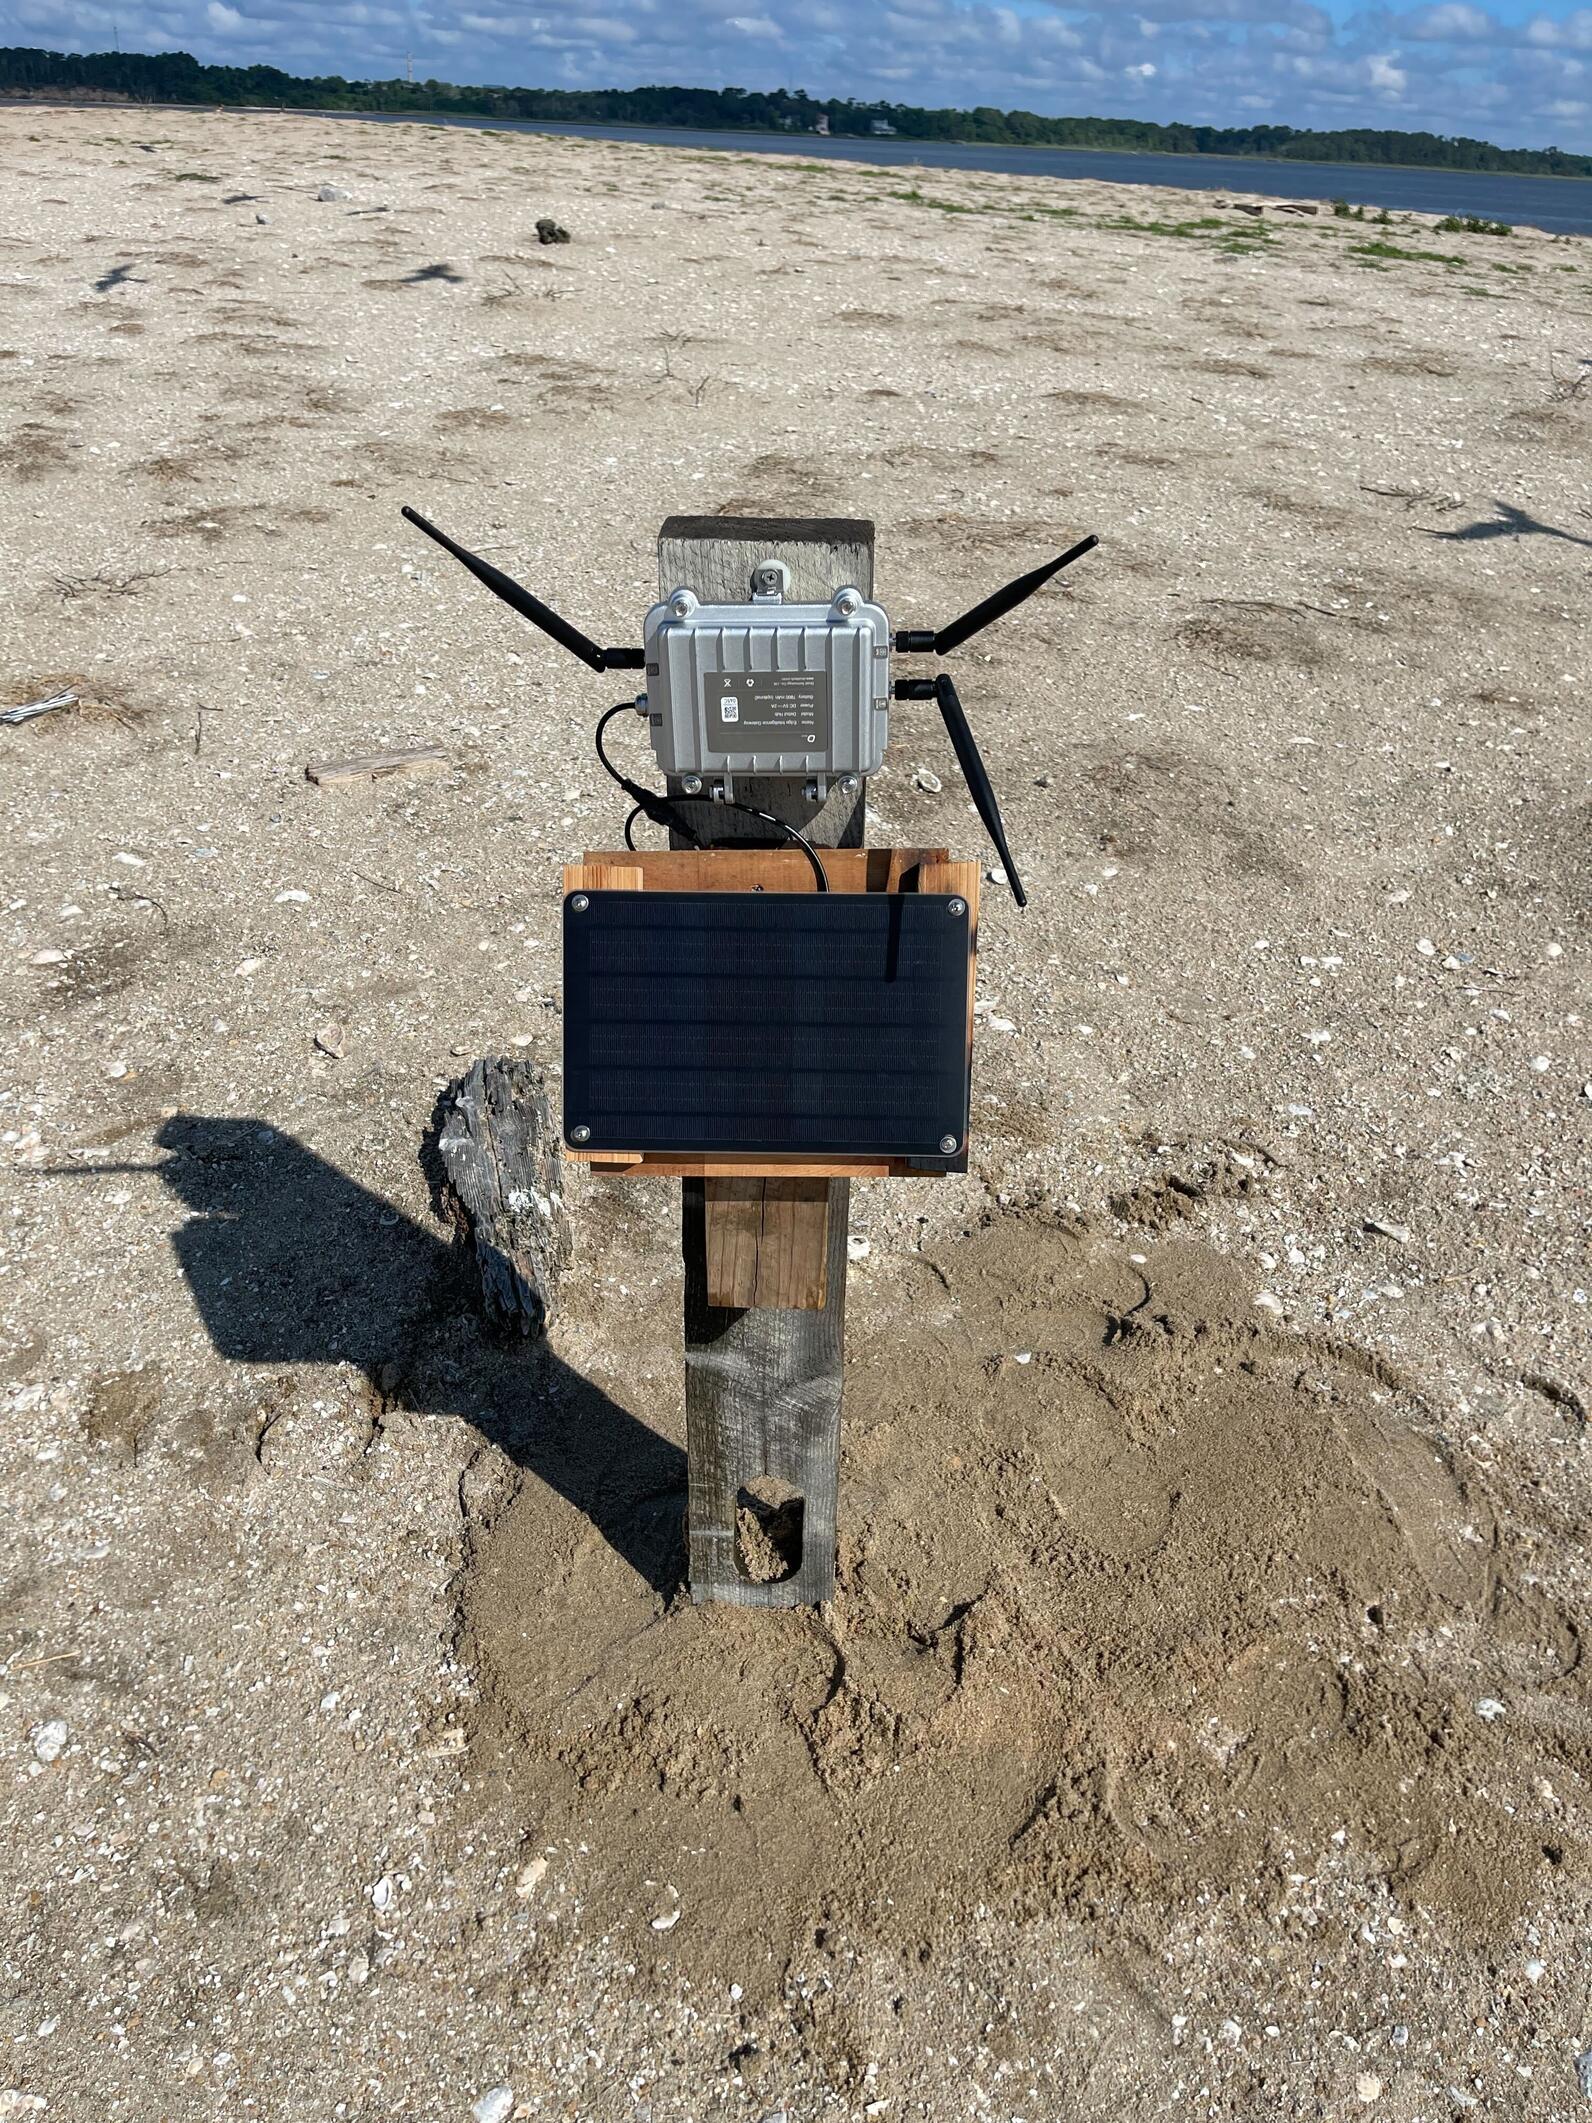 Solar-powered receiver that downloads the terns' data on the island. Photo: Brittany Salmons/Audubon